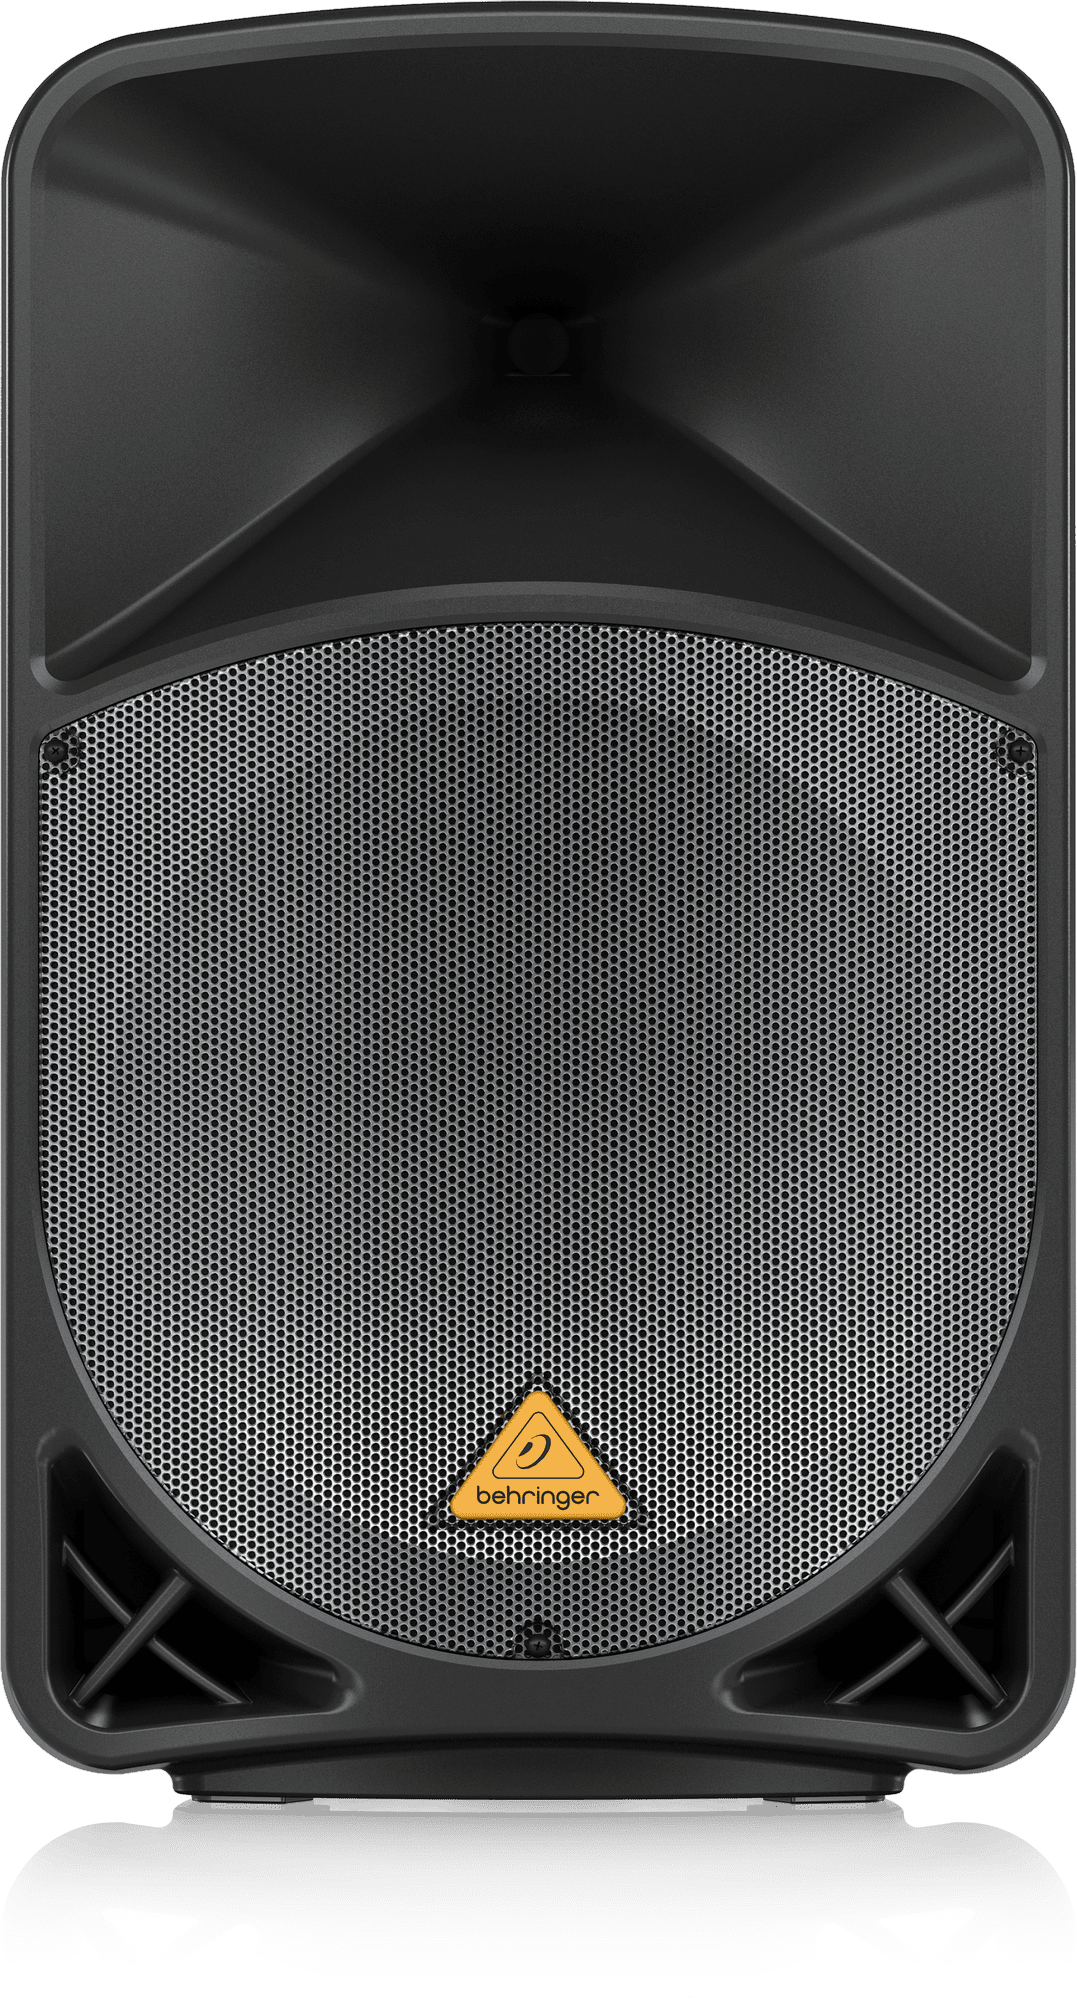 Lightweight and powerful, the Behringer Eurolive B115D active PA speaker delivers excellent, low-distortion power and state-of-the-art features.